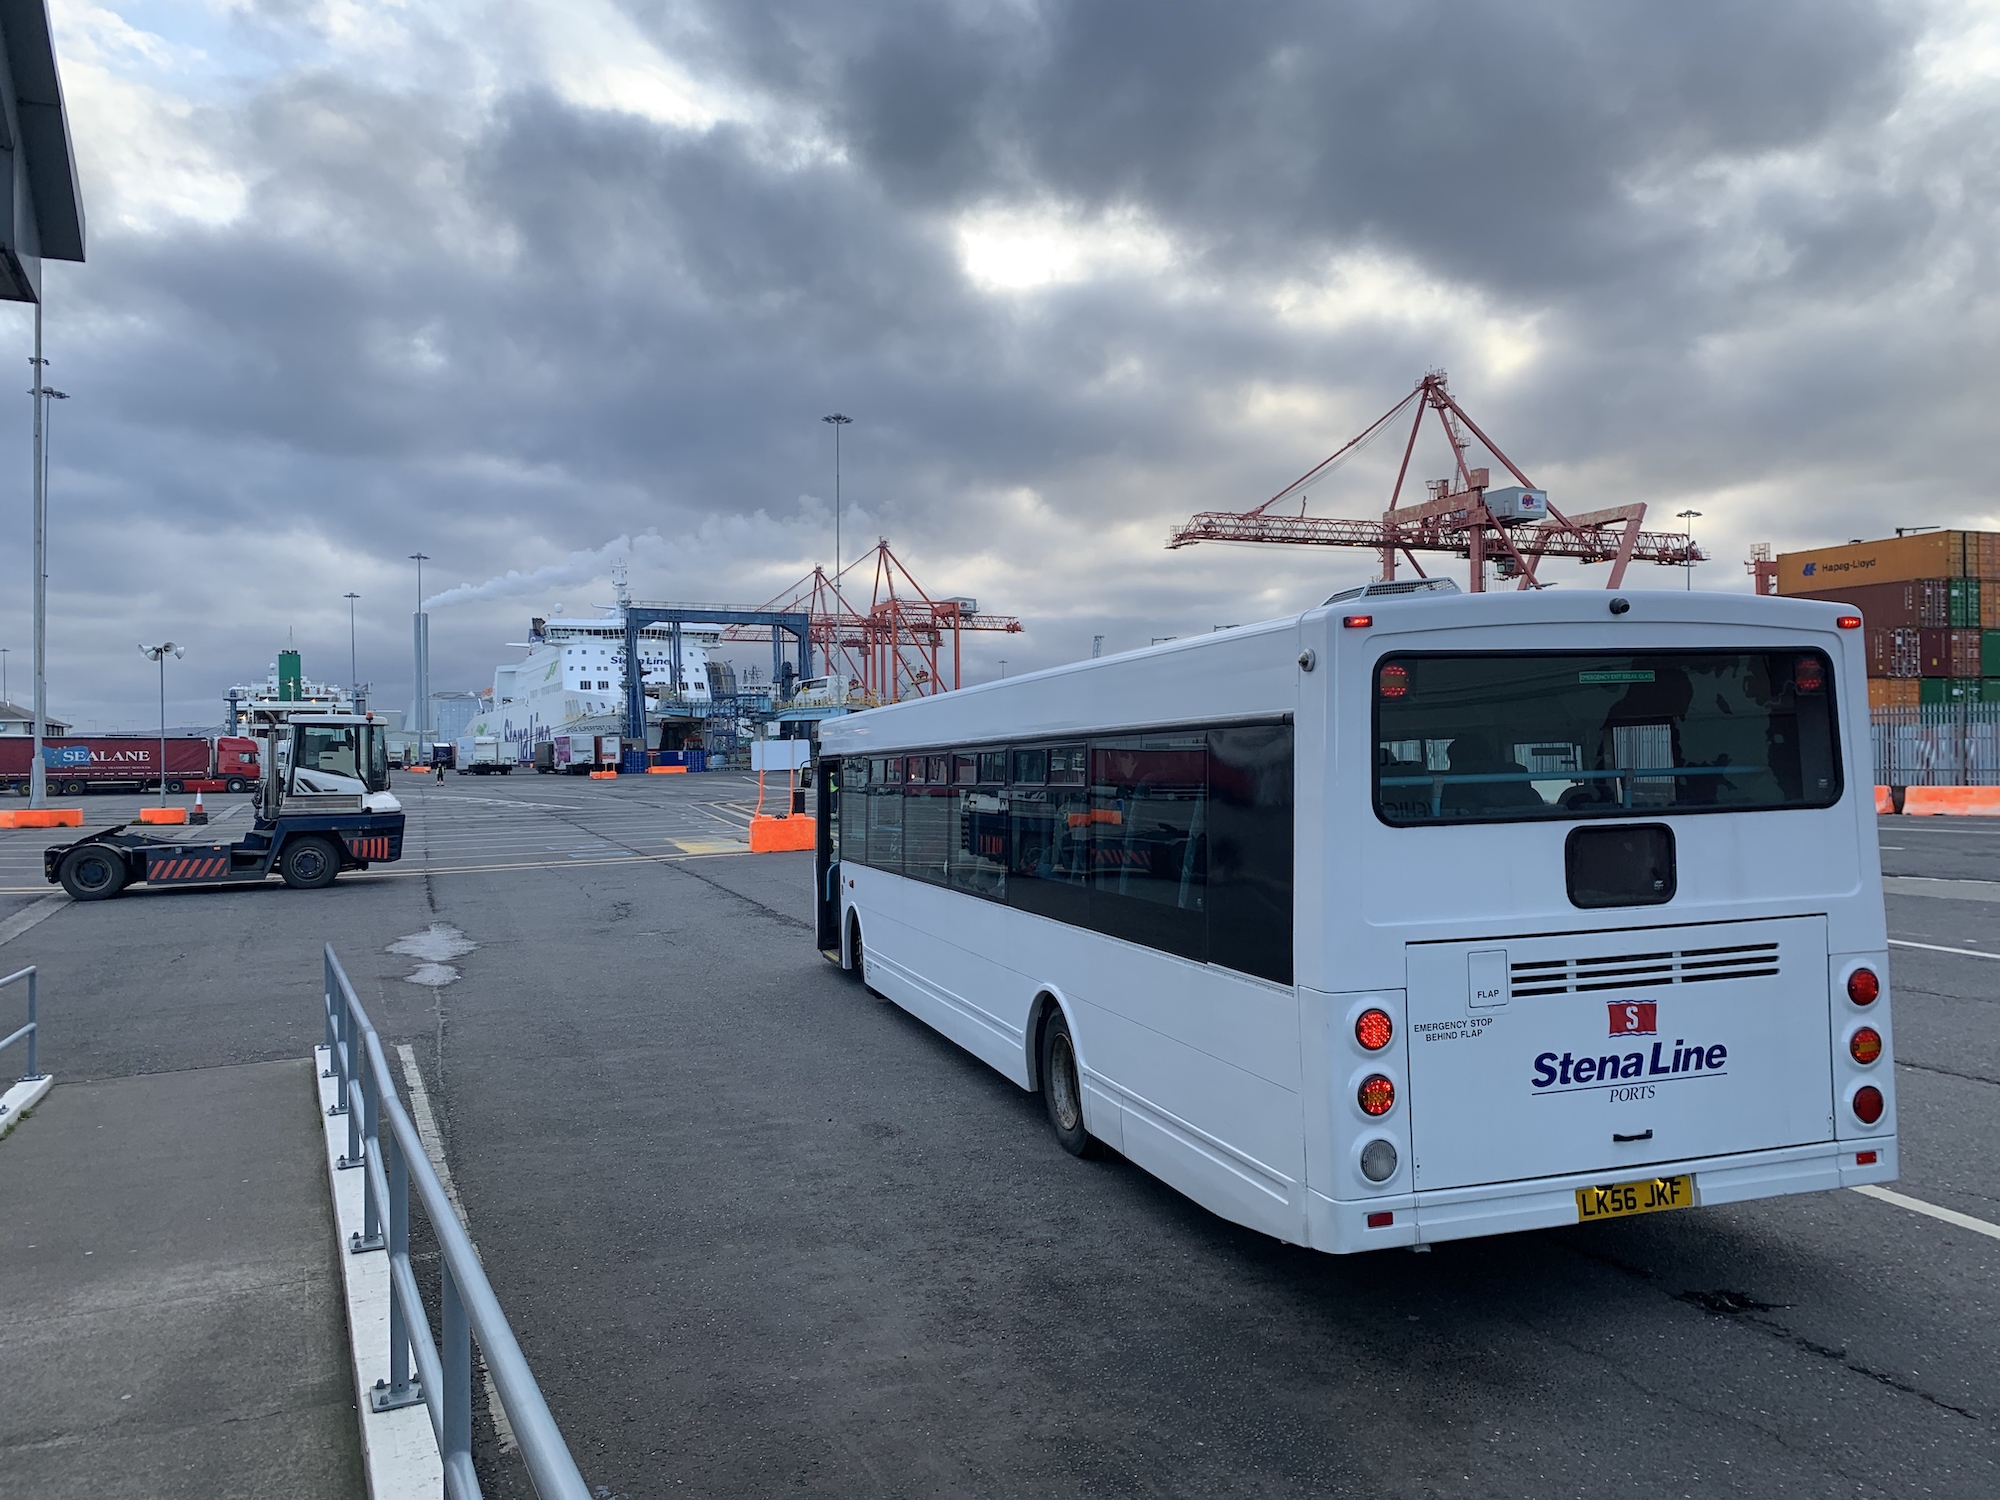 A whole bus to help 27 pedestrians and 3 cyclists get 200 meters onto the boat